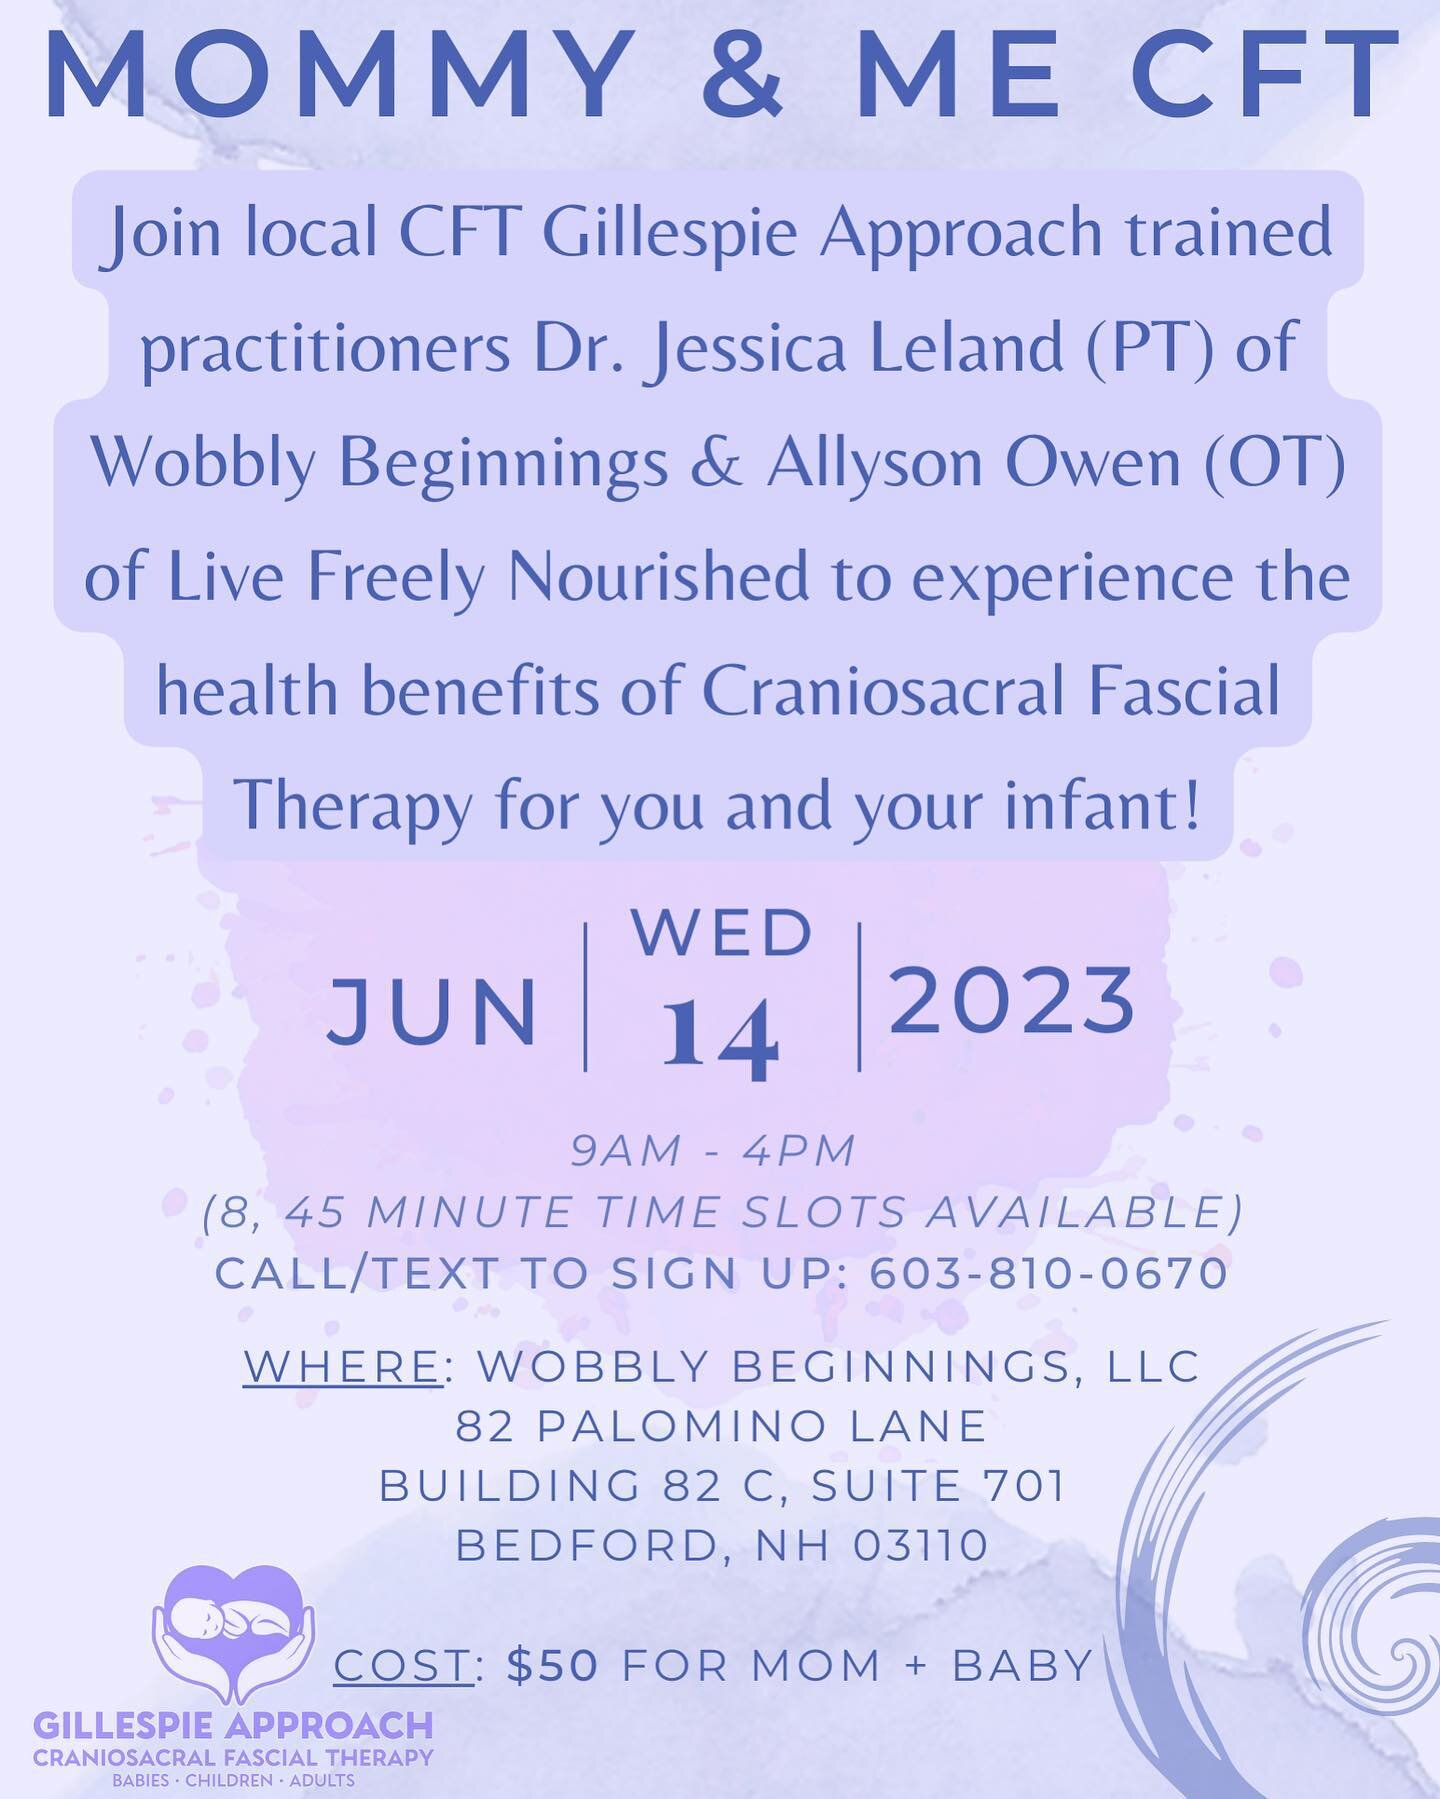 Very excited to partner with Dr. Jessica in three weeks to offer local mamas and their pre-crawling babies a joint CFT session. Each 45 minute time slot will consist of some baseline education regarding craniosacral fascial therapy, as well as a sess